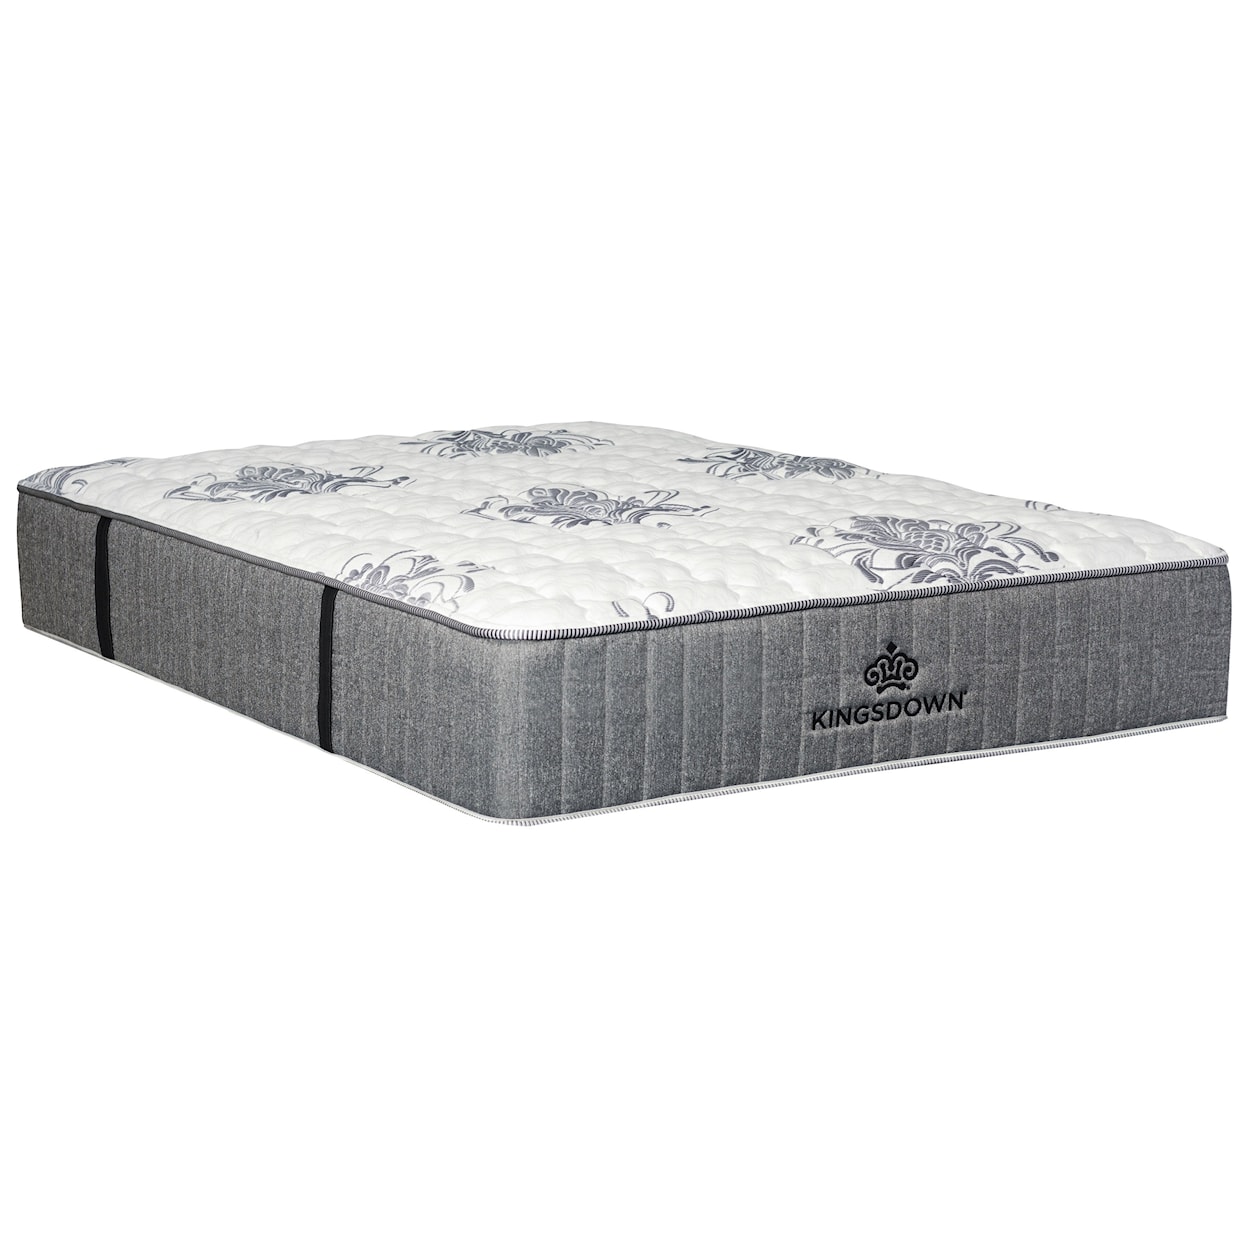 Kingsdown Passions Zest Firm Full 14 1/2" Firm Coil on Coil Mattress